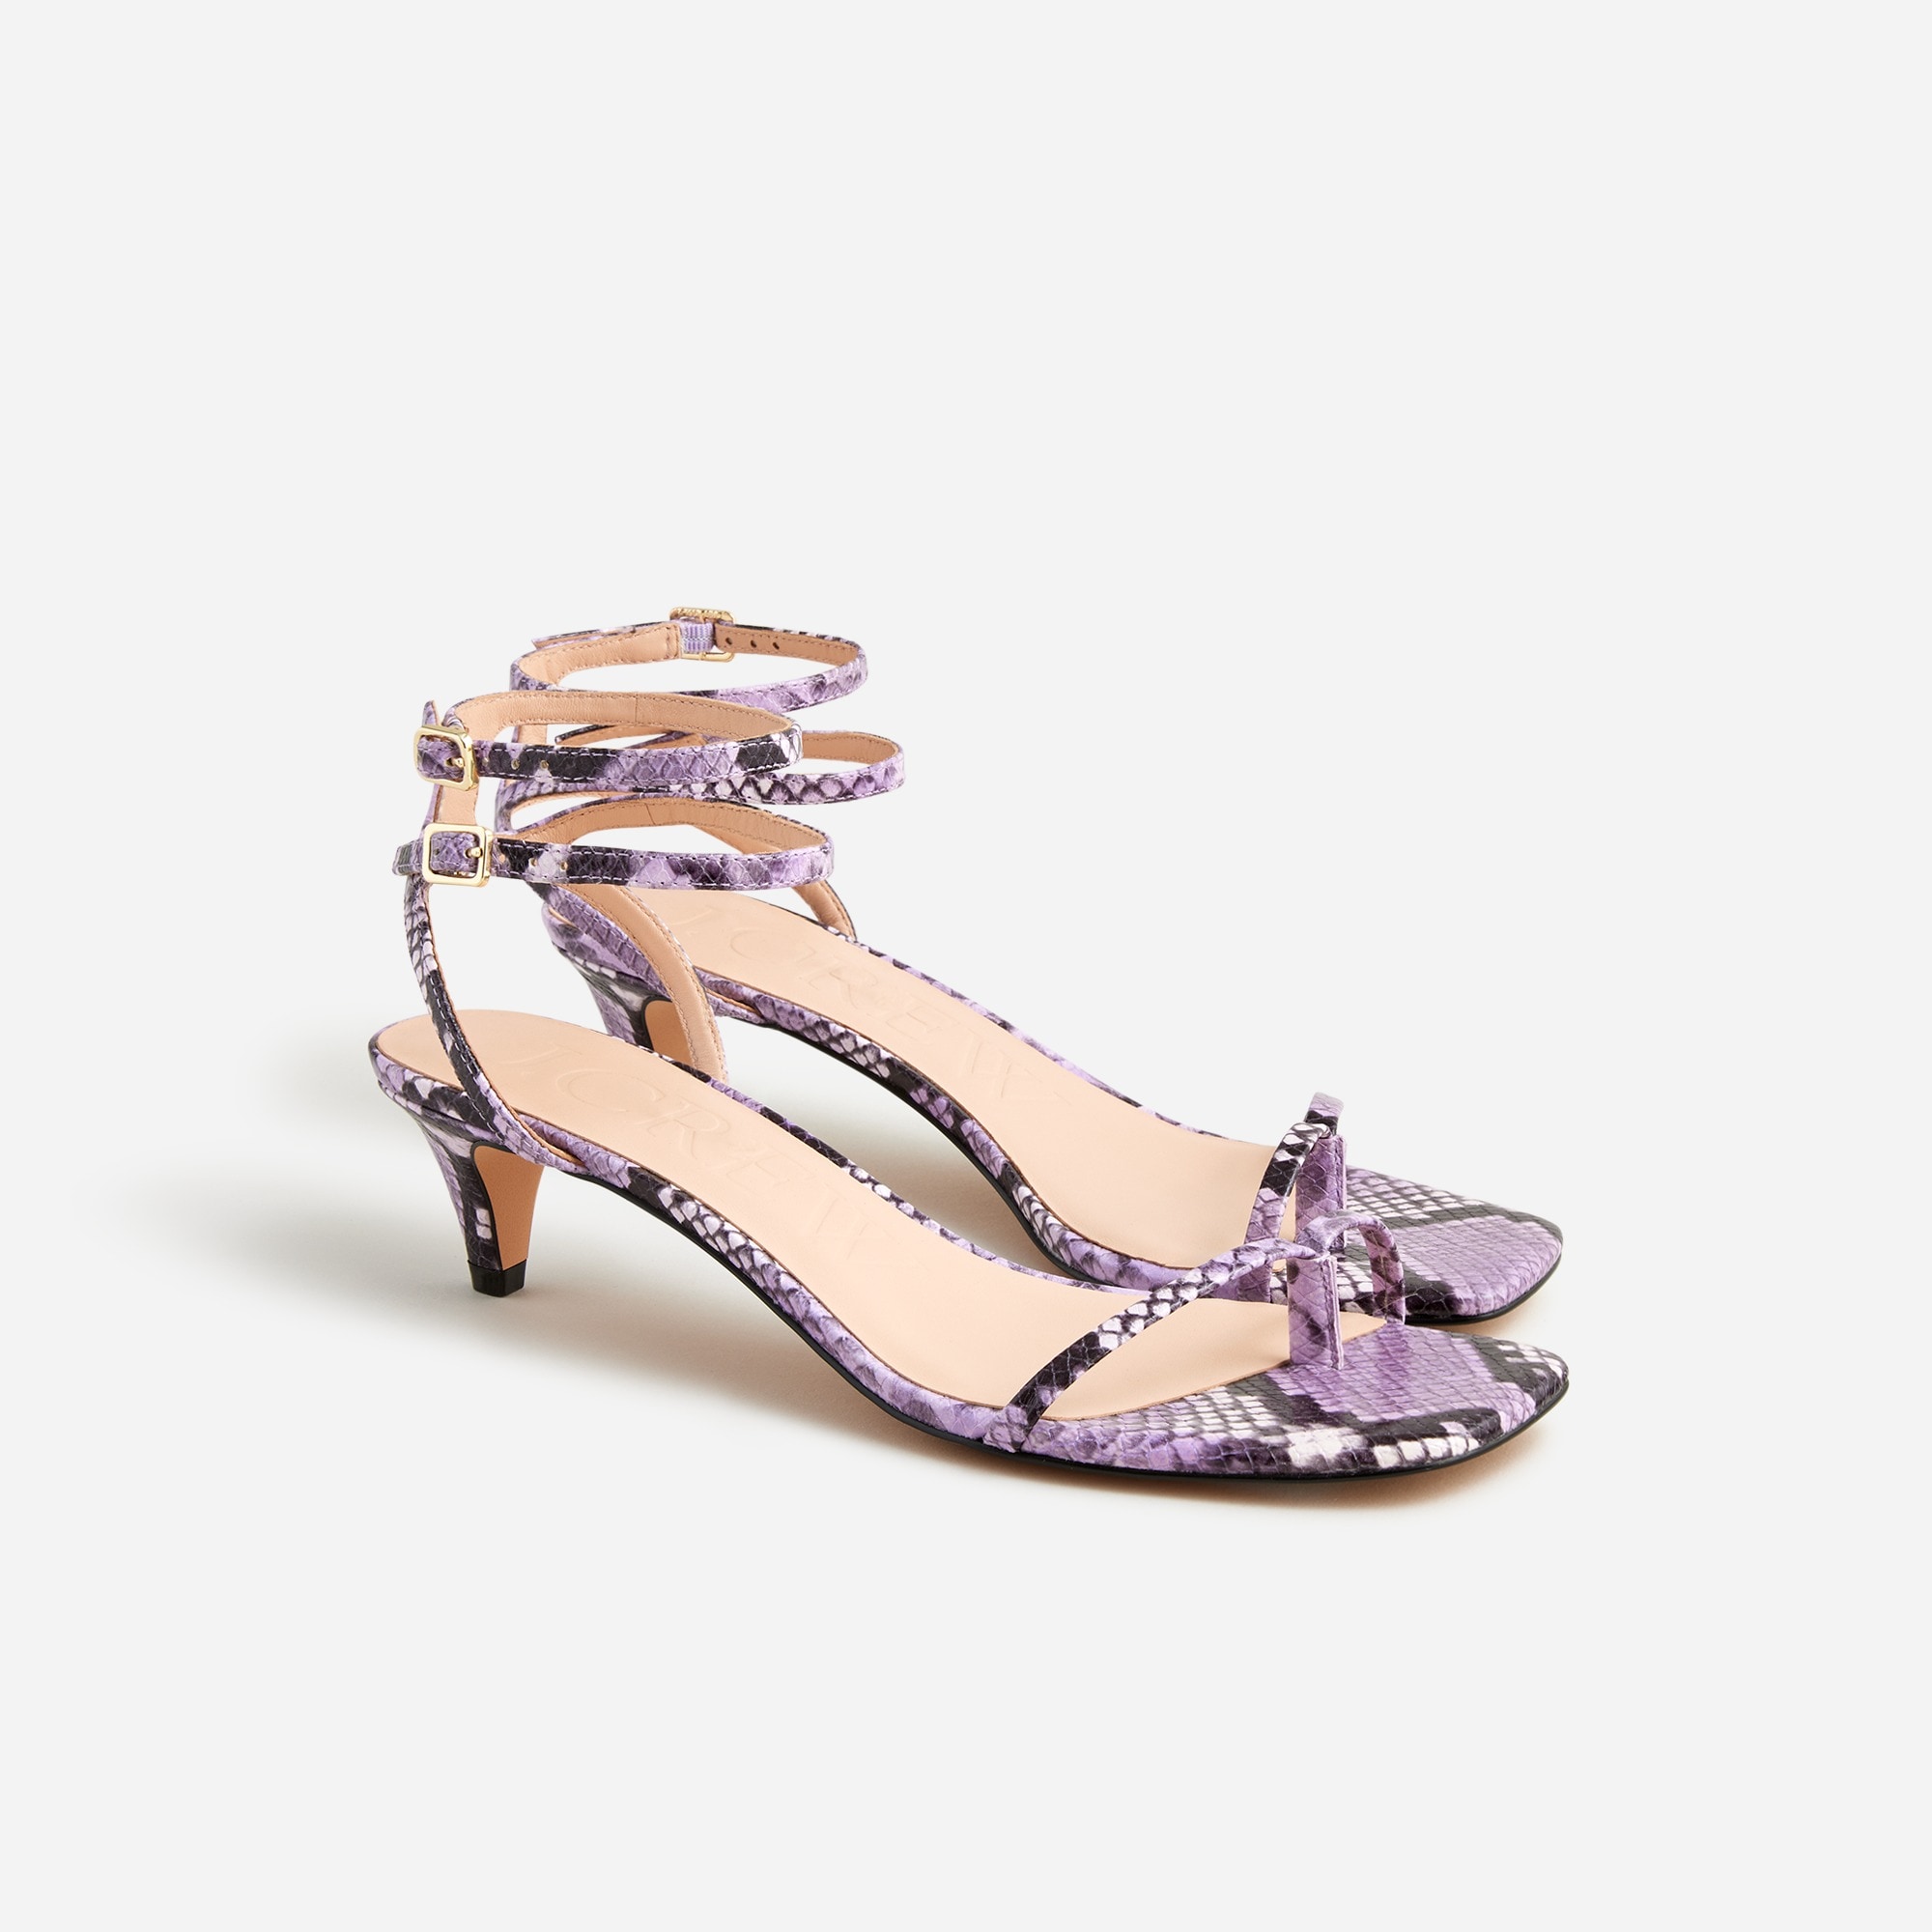  Zadie double ankle-strap heels in snake-embossed leather